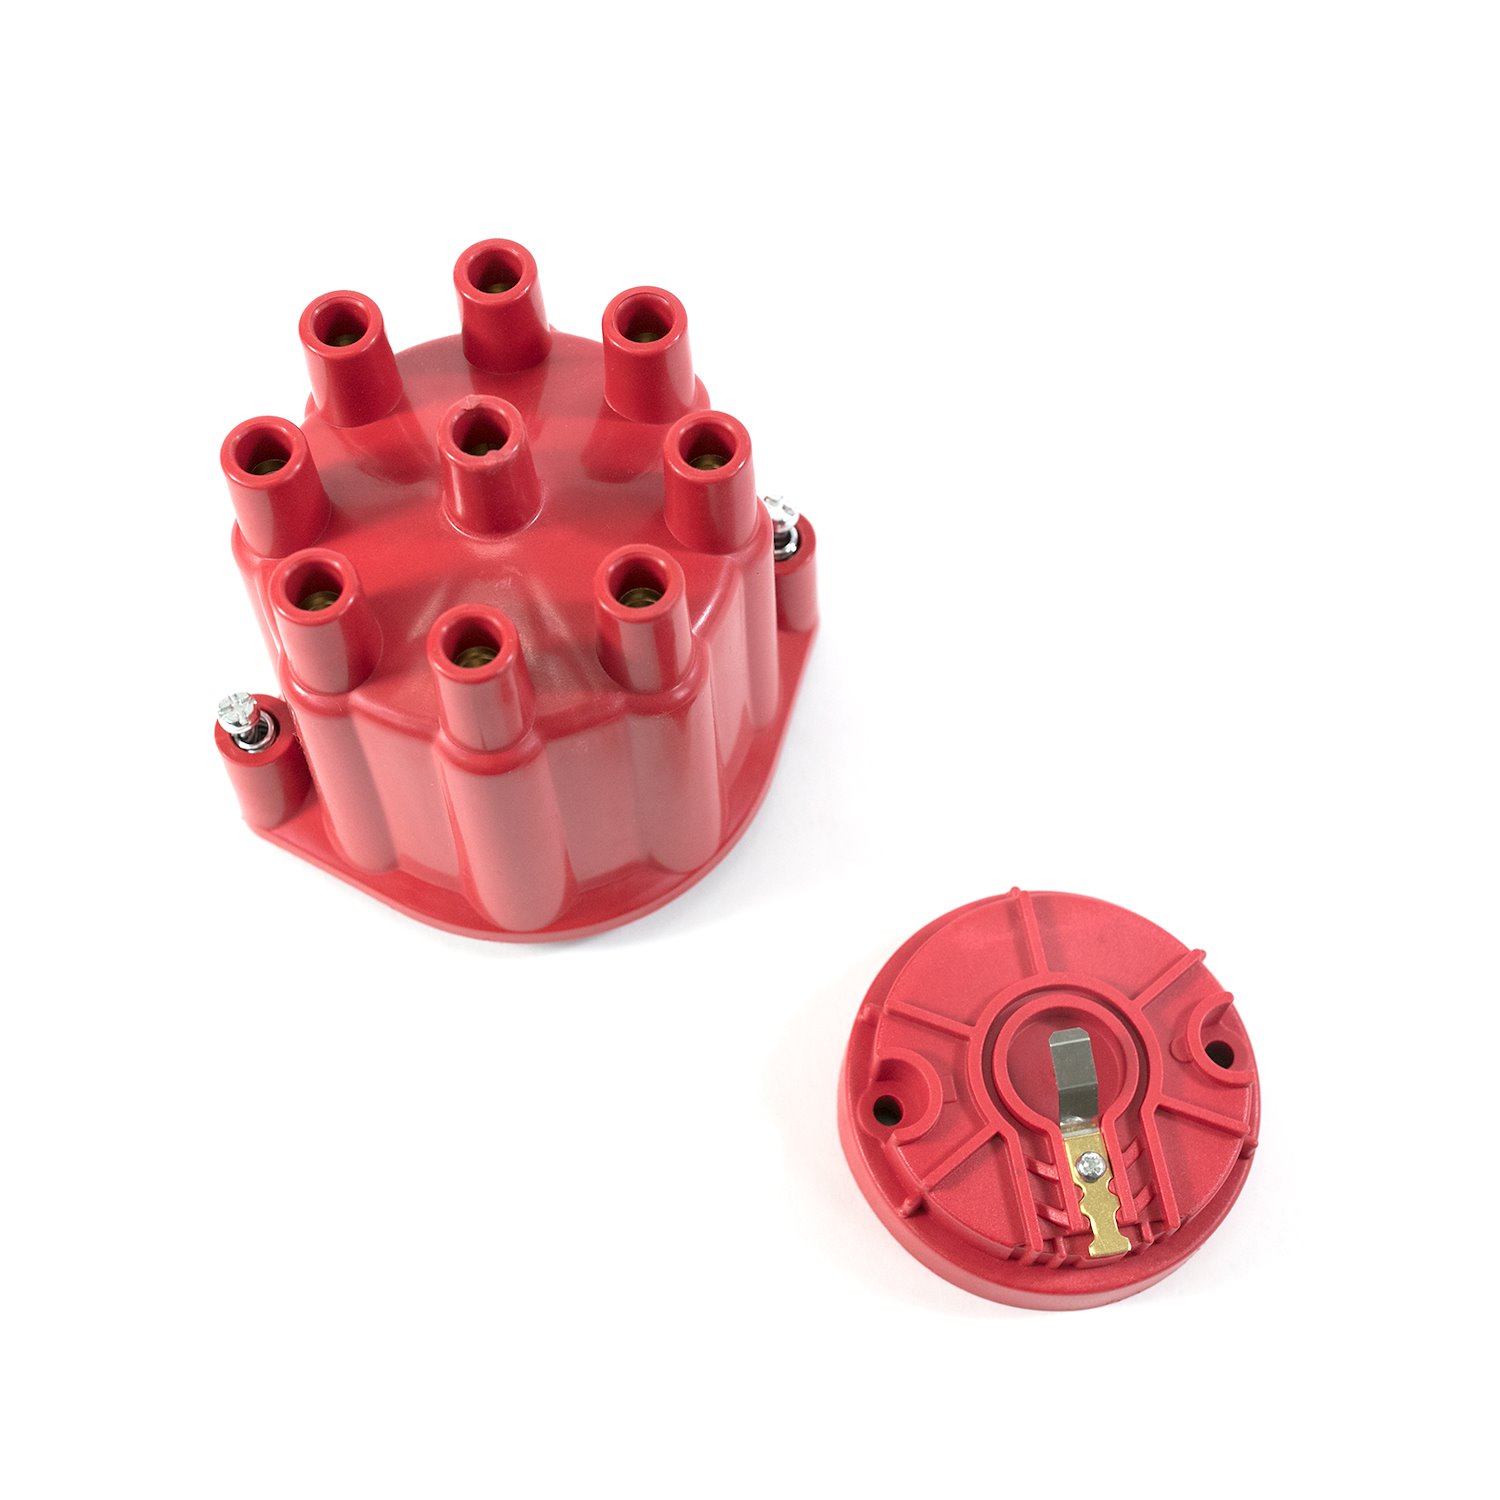 JM6974R Pro Series Distributor Cap and Rotor Kit, 8 Cylinder Female, Red